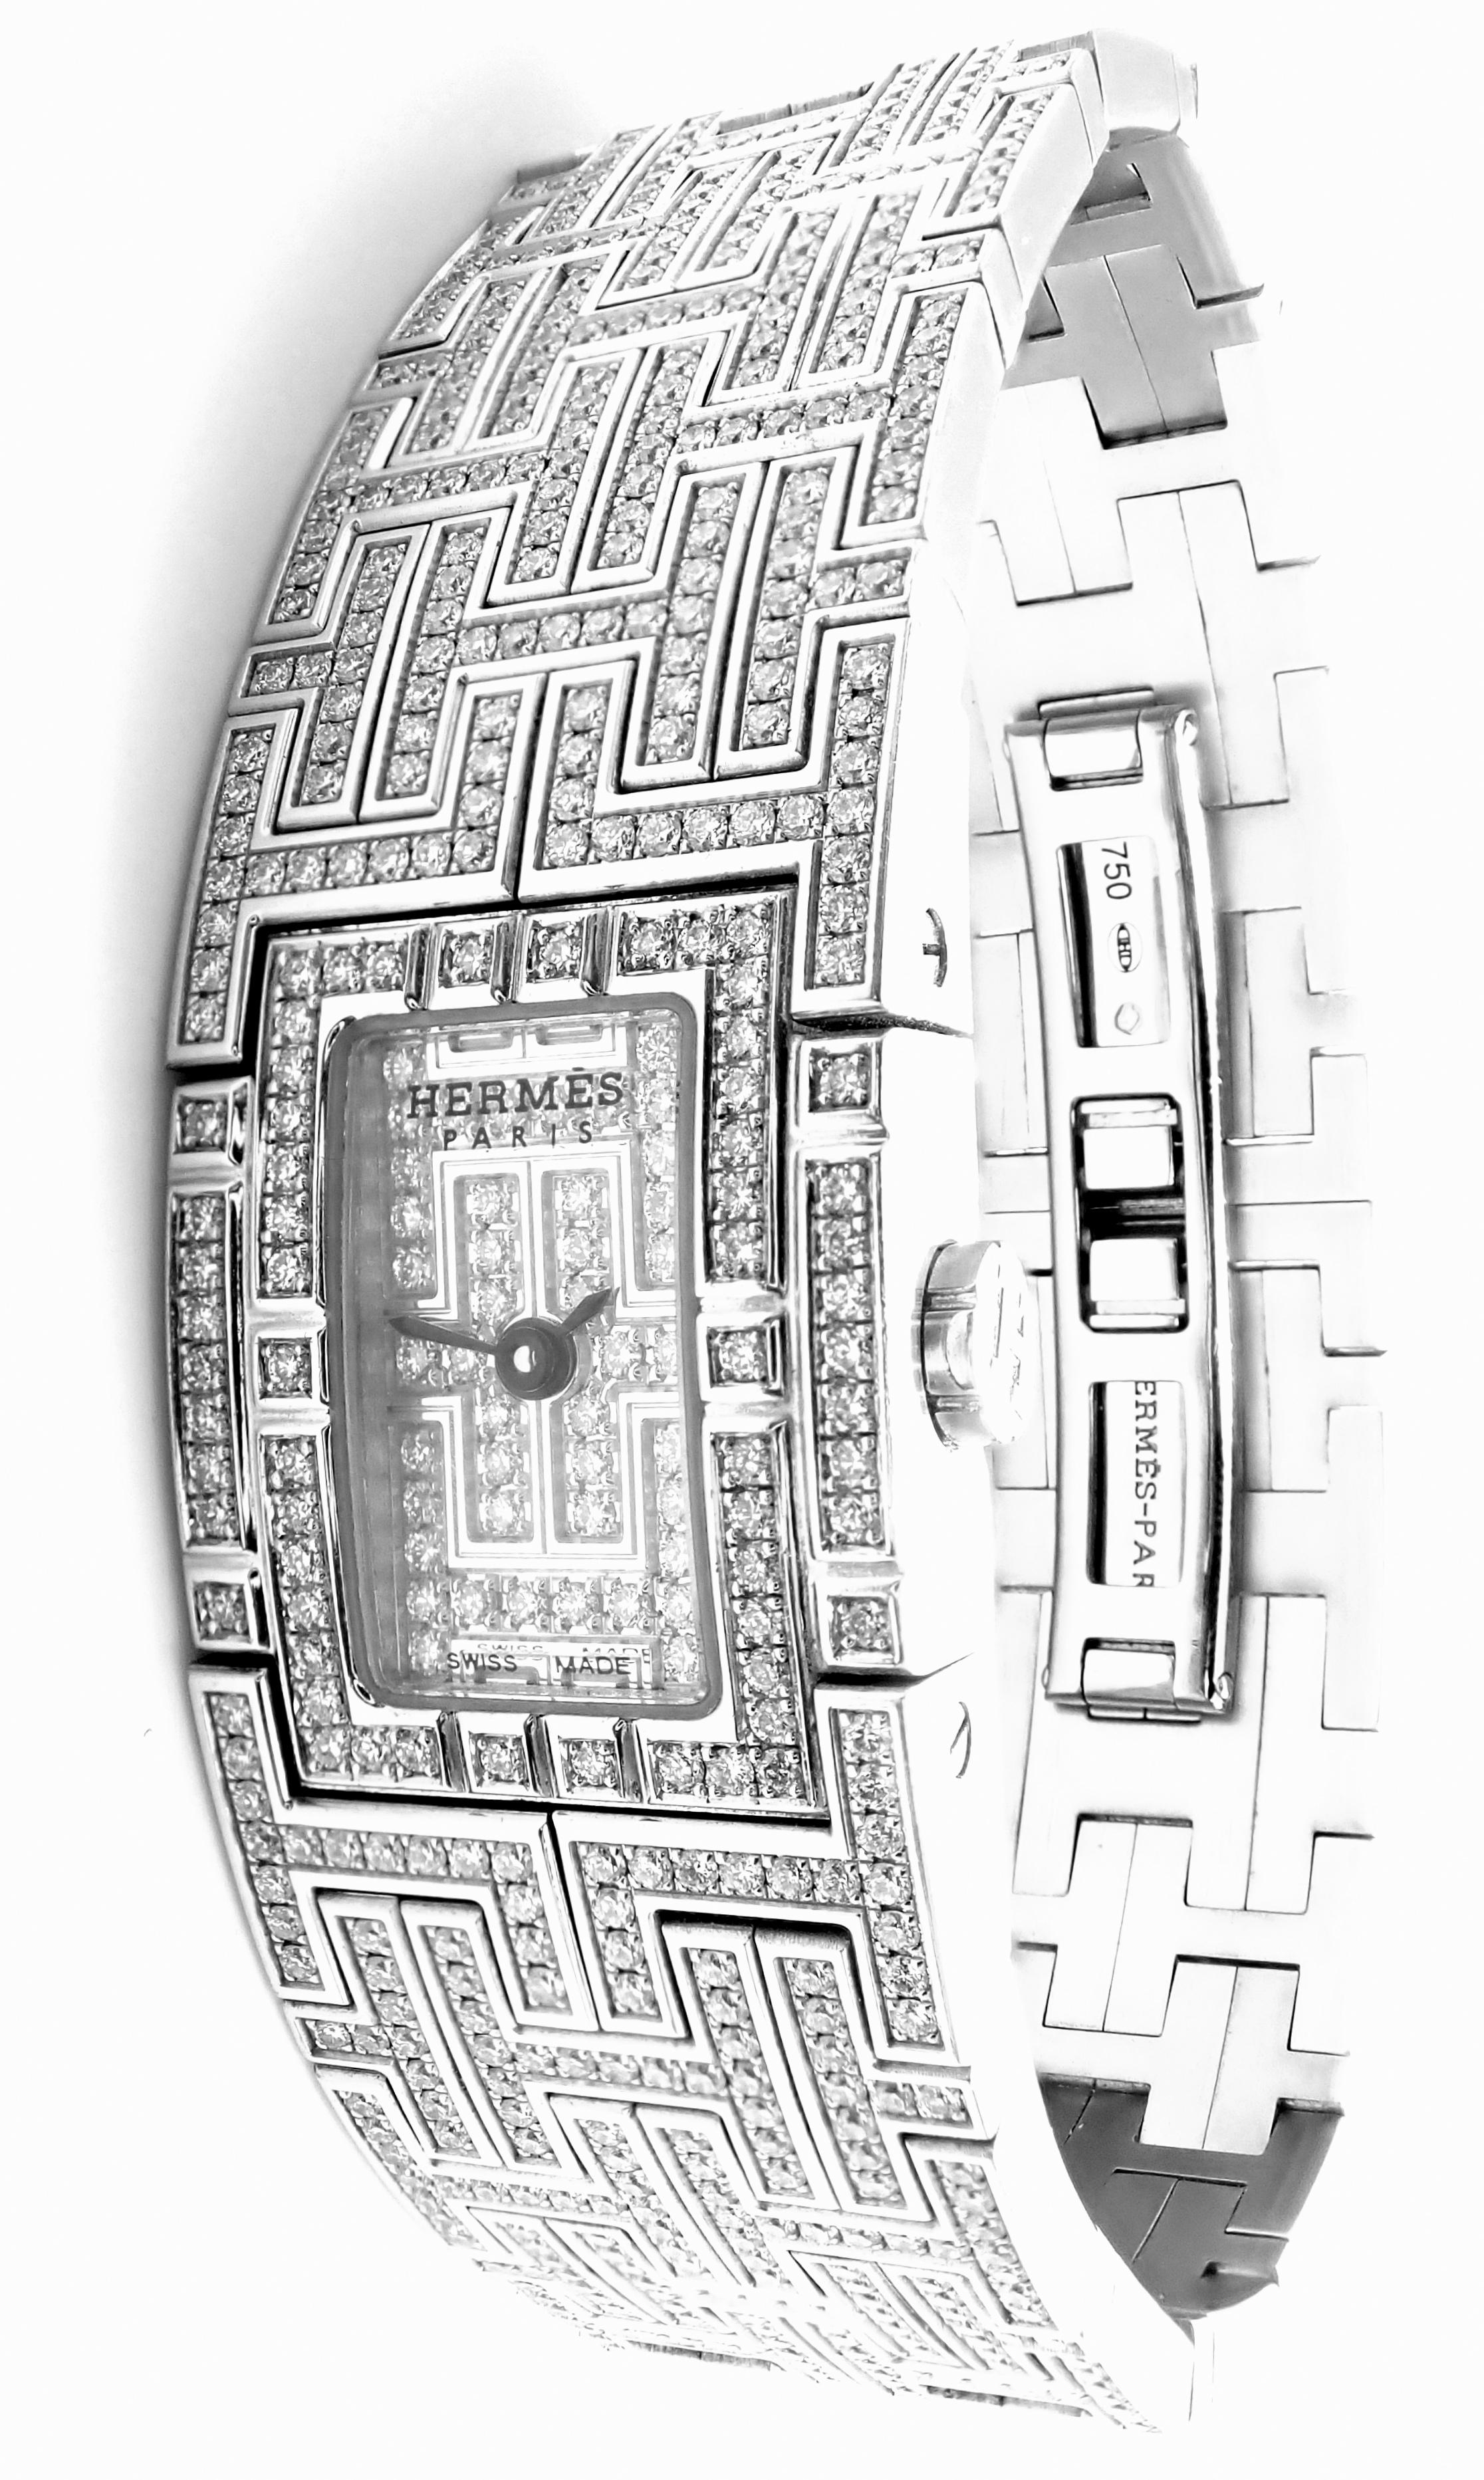 18k White Gold Full Diamond H Bracelet Kilim Ladies Watch by Hermes.  
With 11076 round brilliant cut diamonds VVS1 clarity E color total weight approx. 4ct
This wristwatch comes with original Hermes box.
Details: 
Model: Kilim
Wrist Size:  Length: